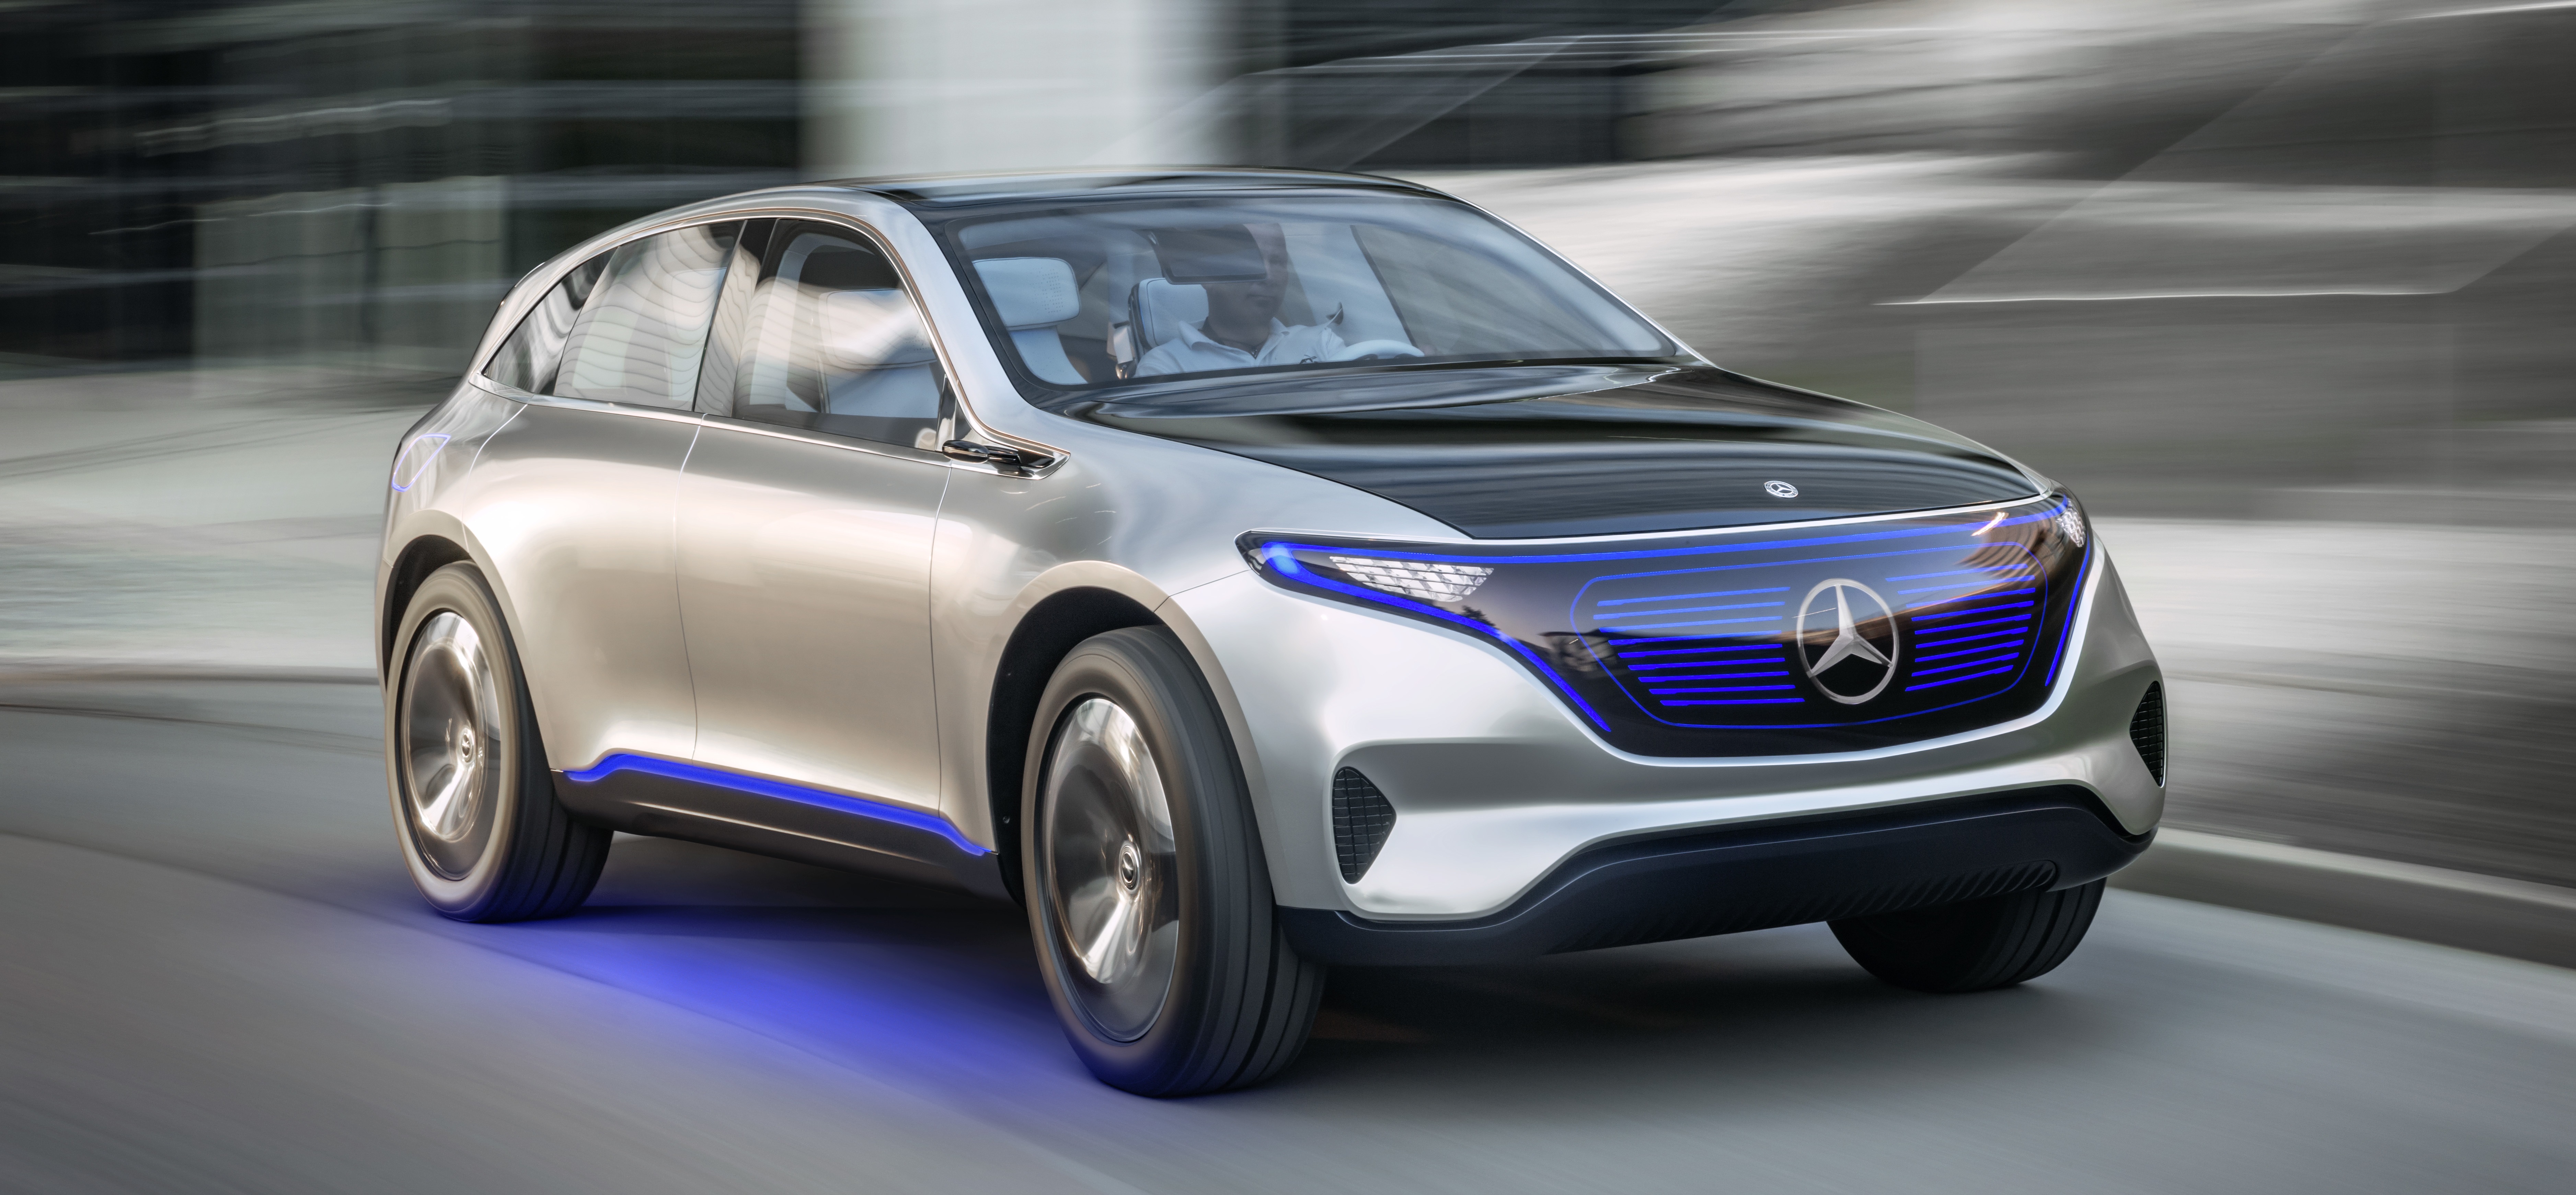 Daimler Announces 1 8 Billion Investment To Produce Mercedes Eq Branded Electric Vehicles In China Electrek